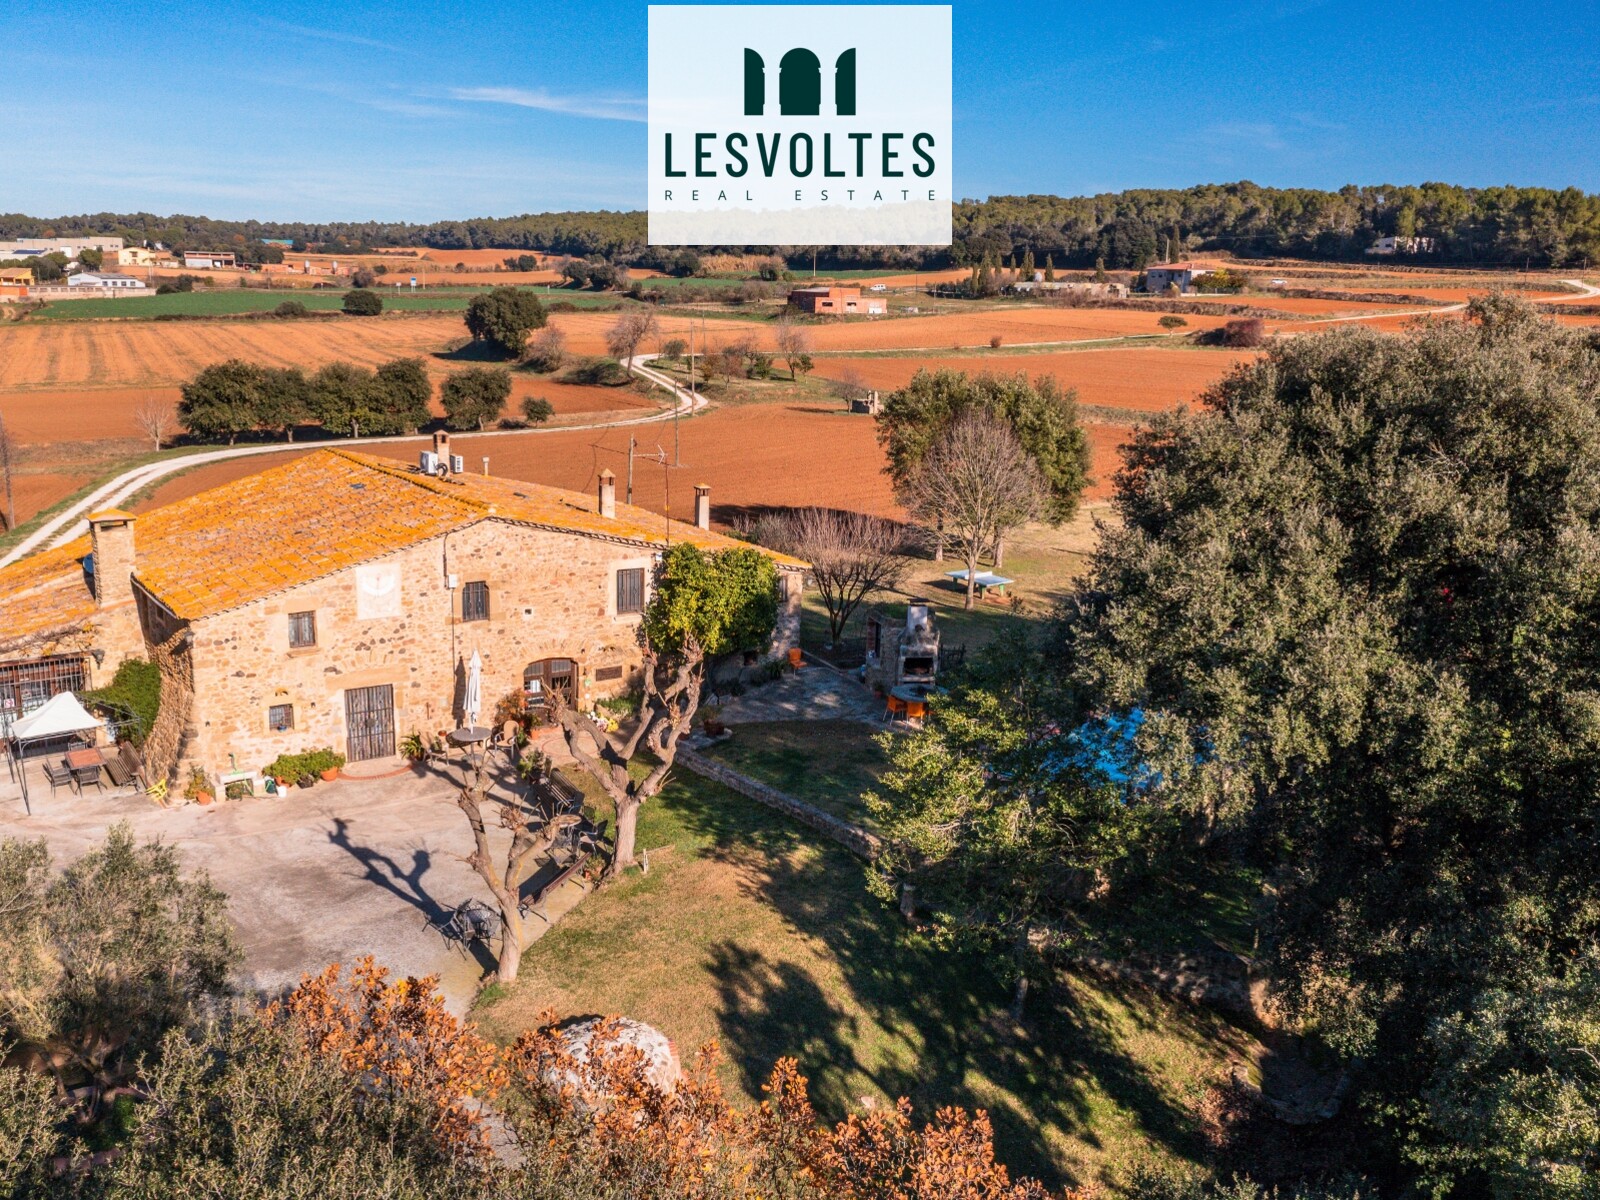 549 M2 FARMHOUSE WITH LAND AND A SWIMMING POOL, FOR SALE IN THE BAIX EMPORDÀ.